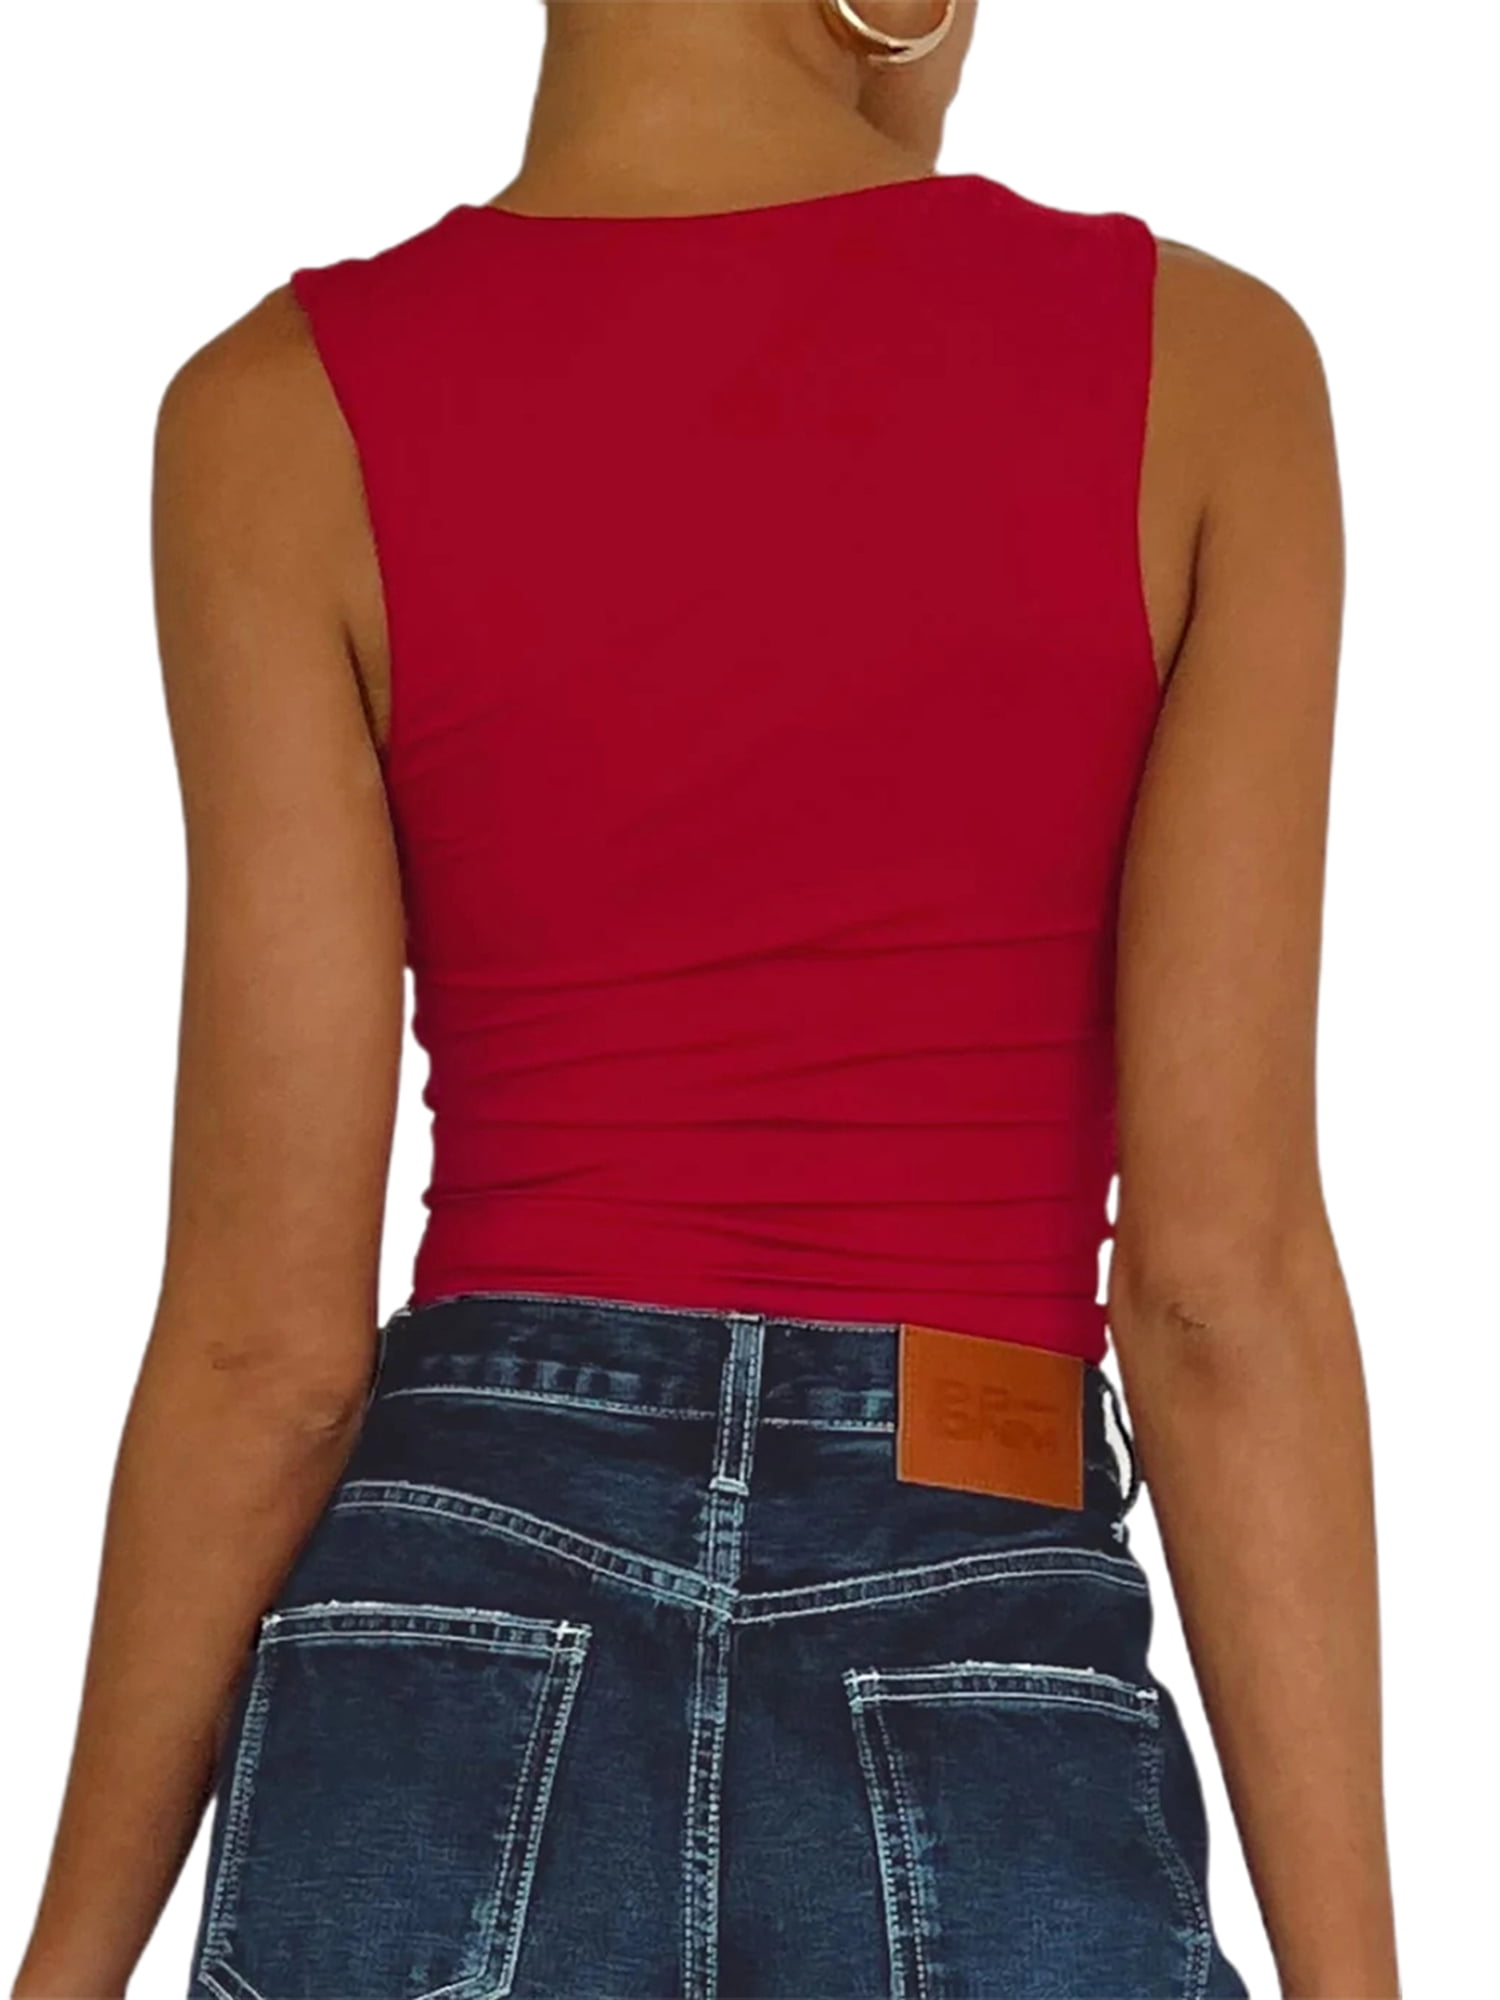 NEW Womens Red Slinky Square Neck Sleeveless Crop Top Size 8 10